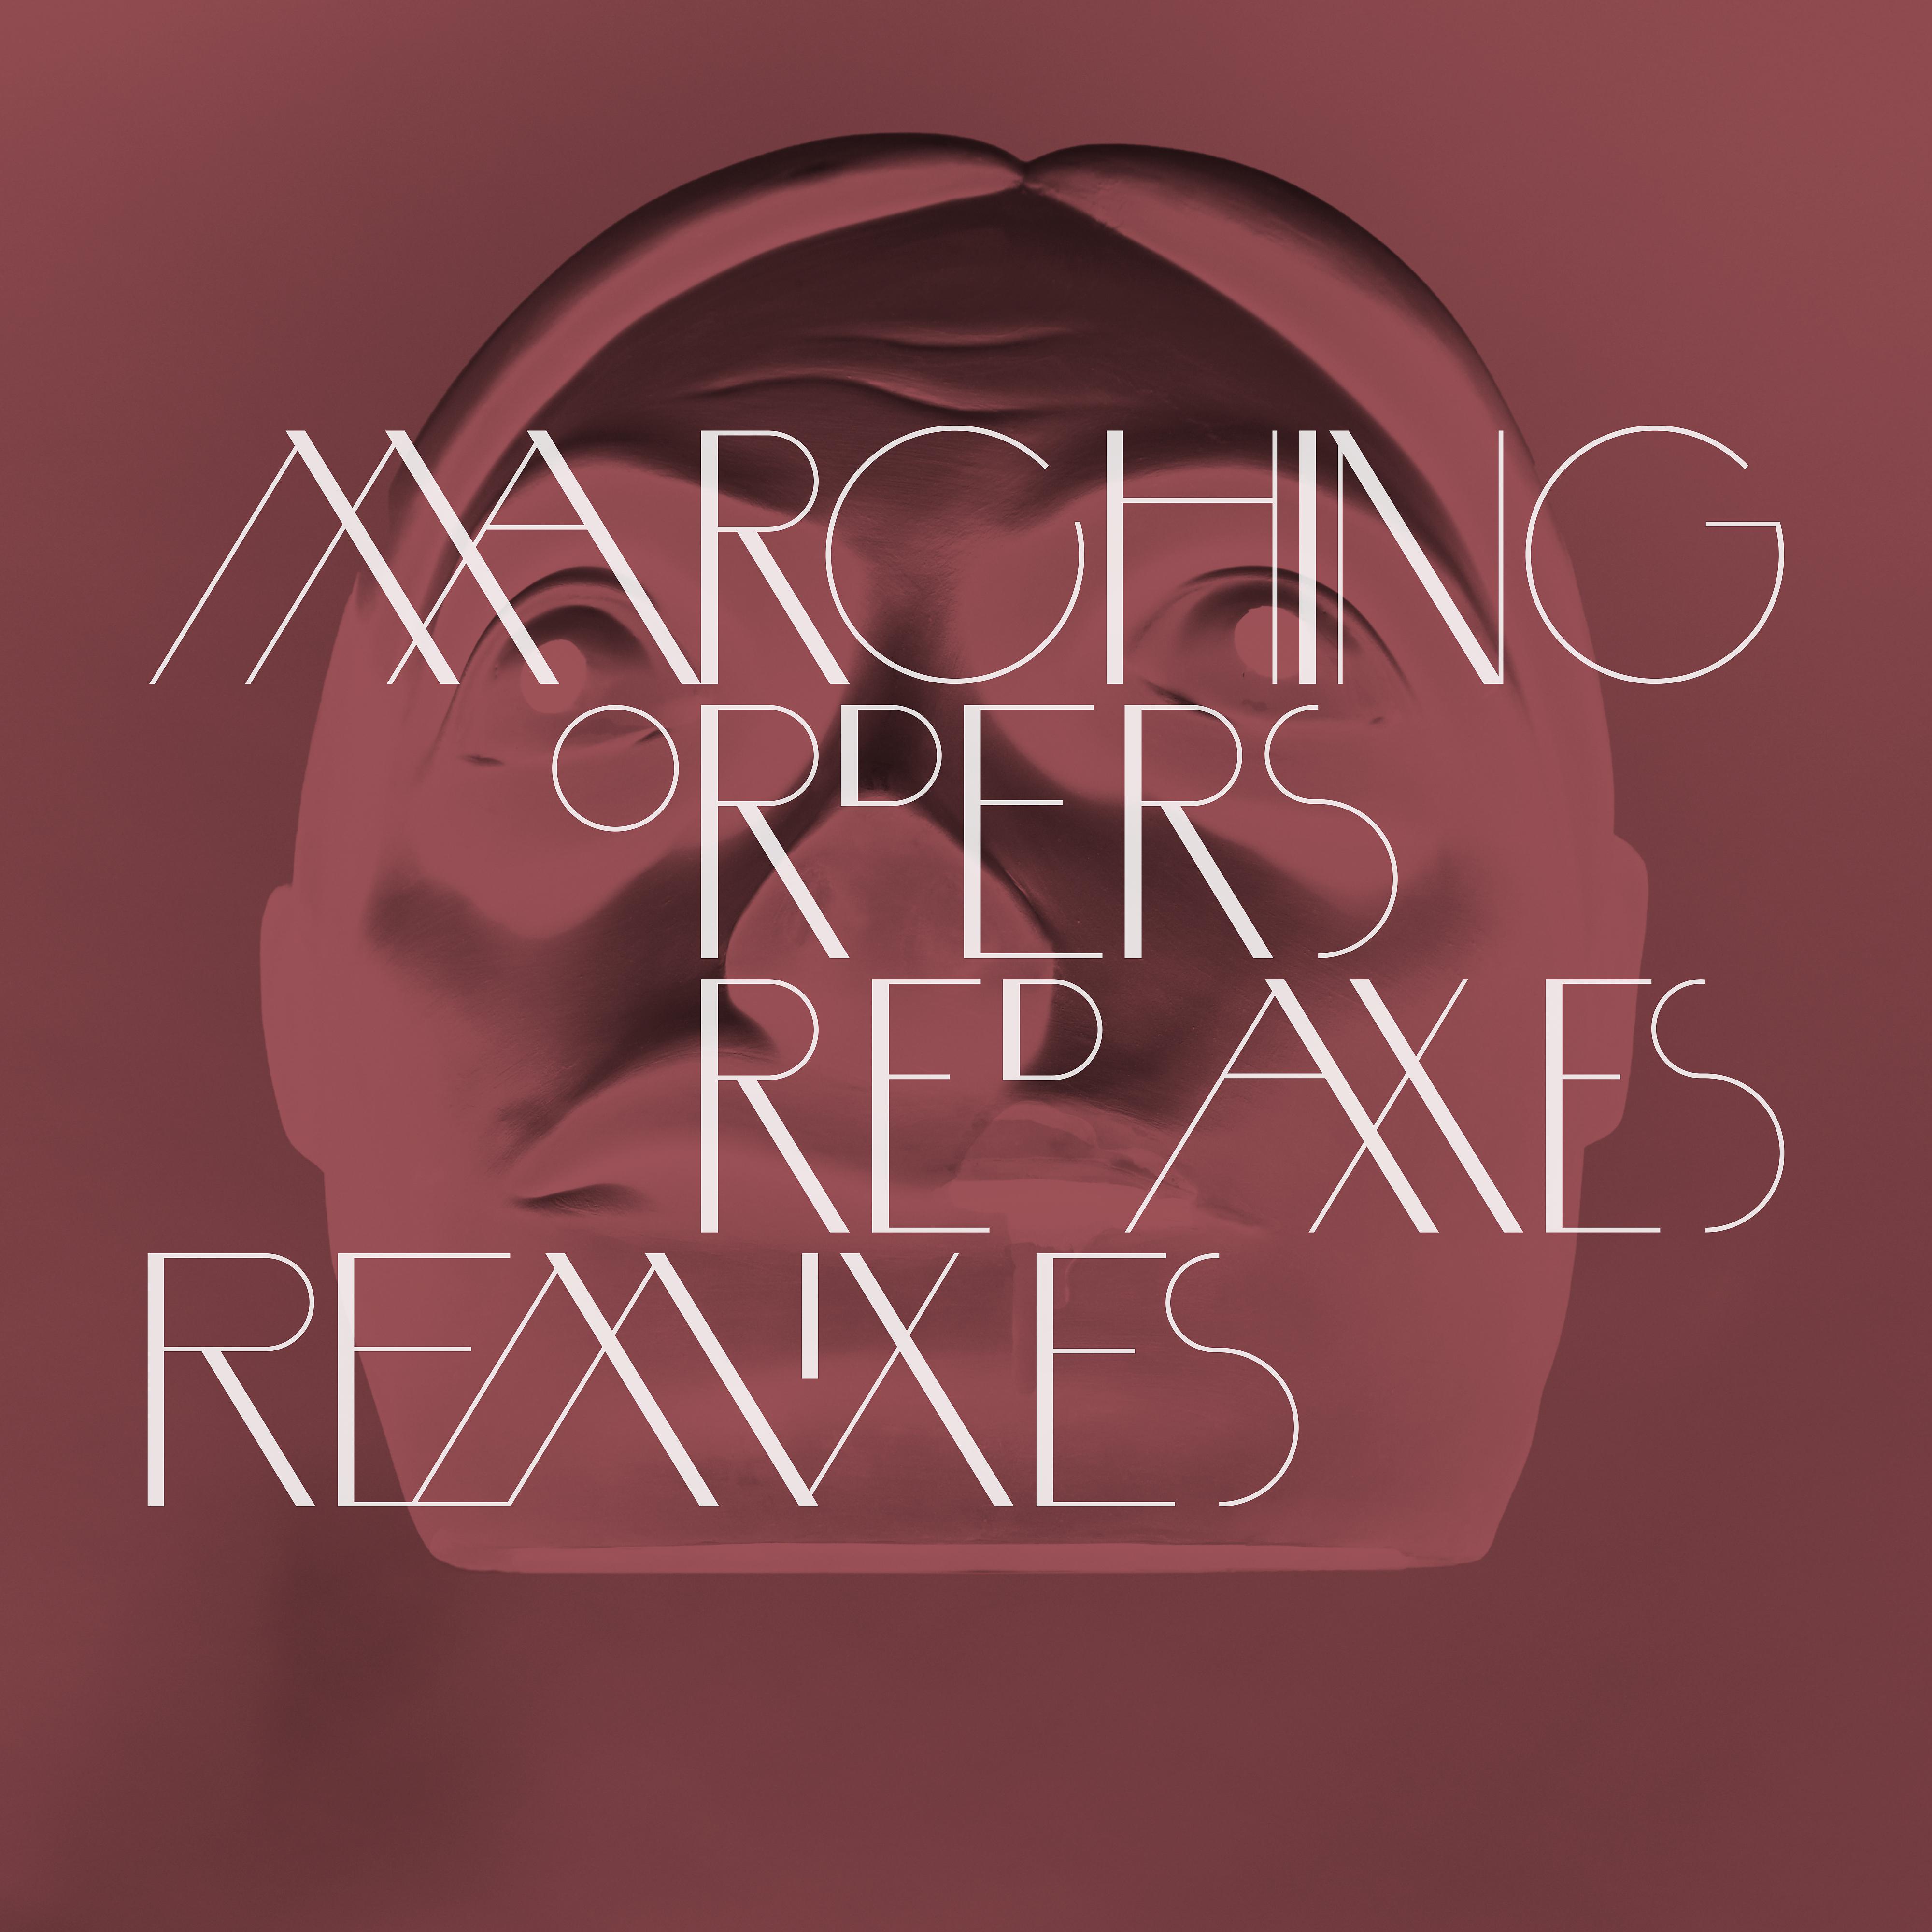 Постер альбома Marching Orders (Red Axes Remixes)